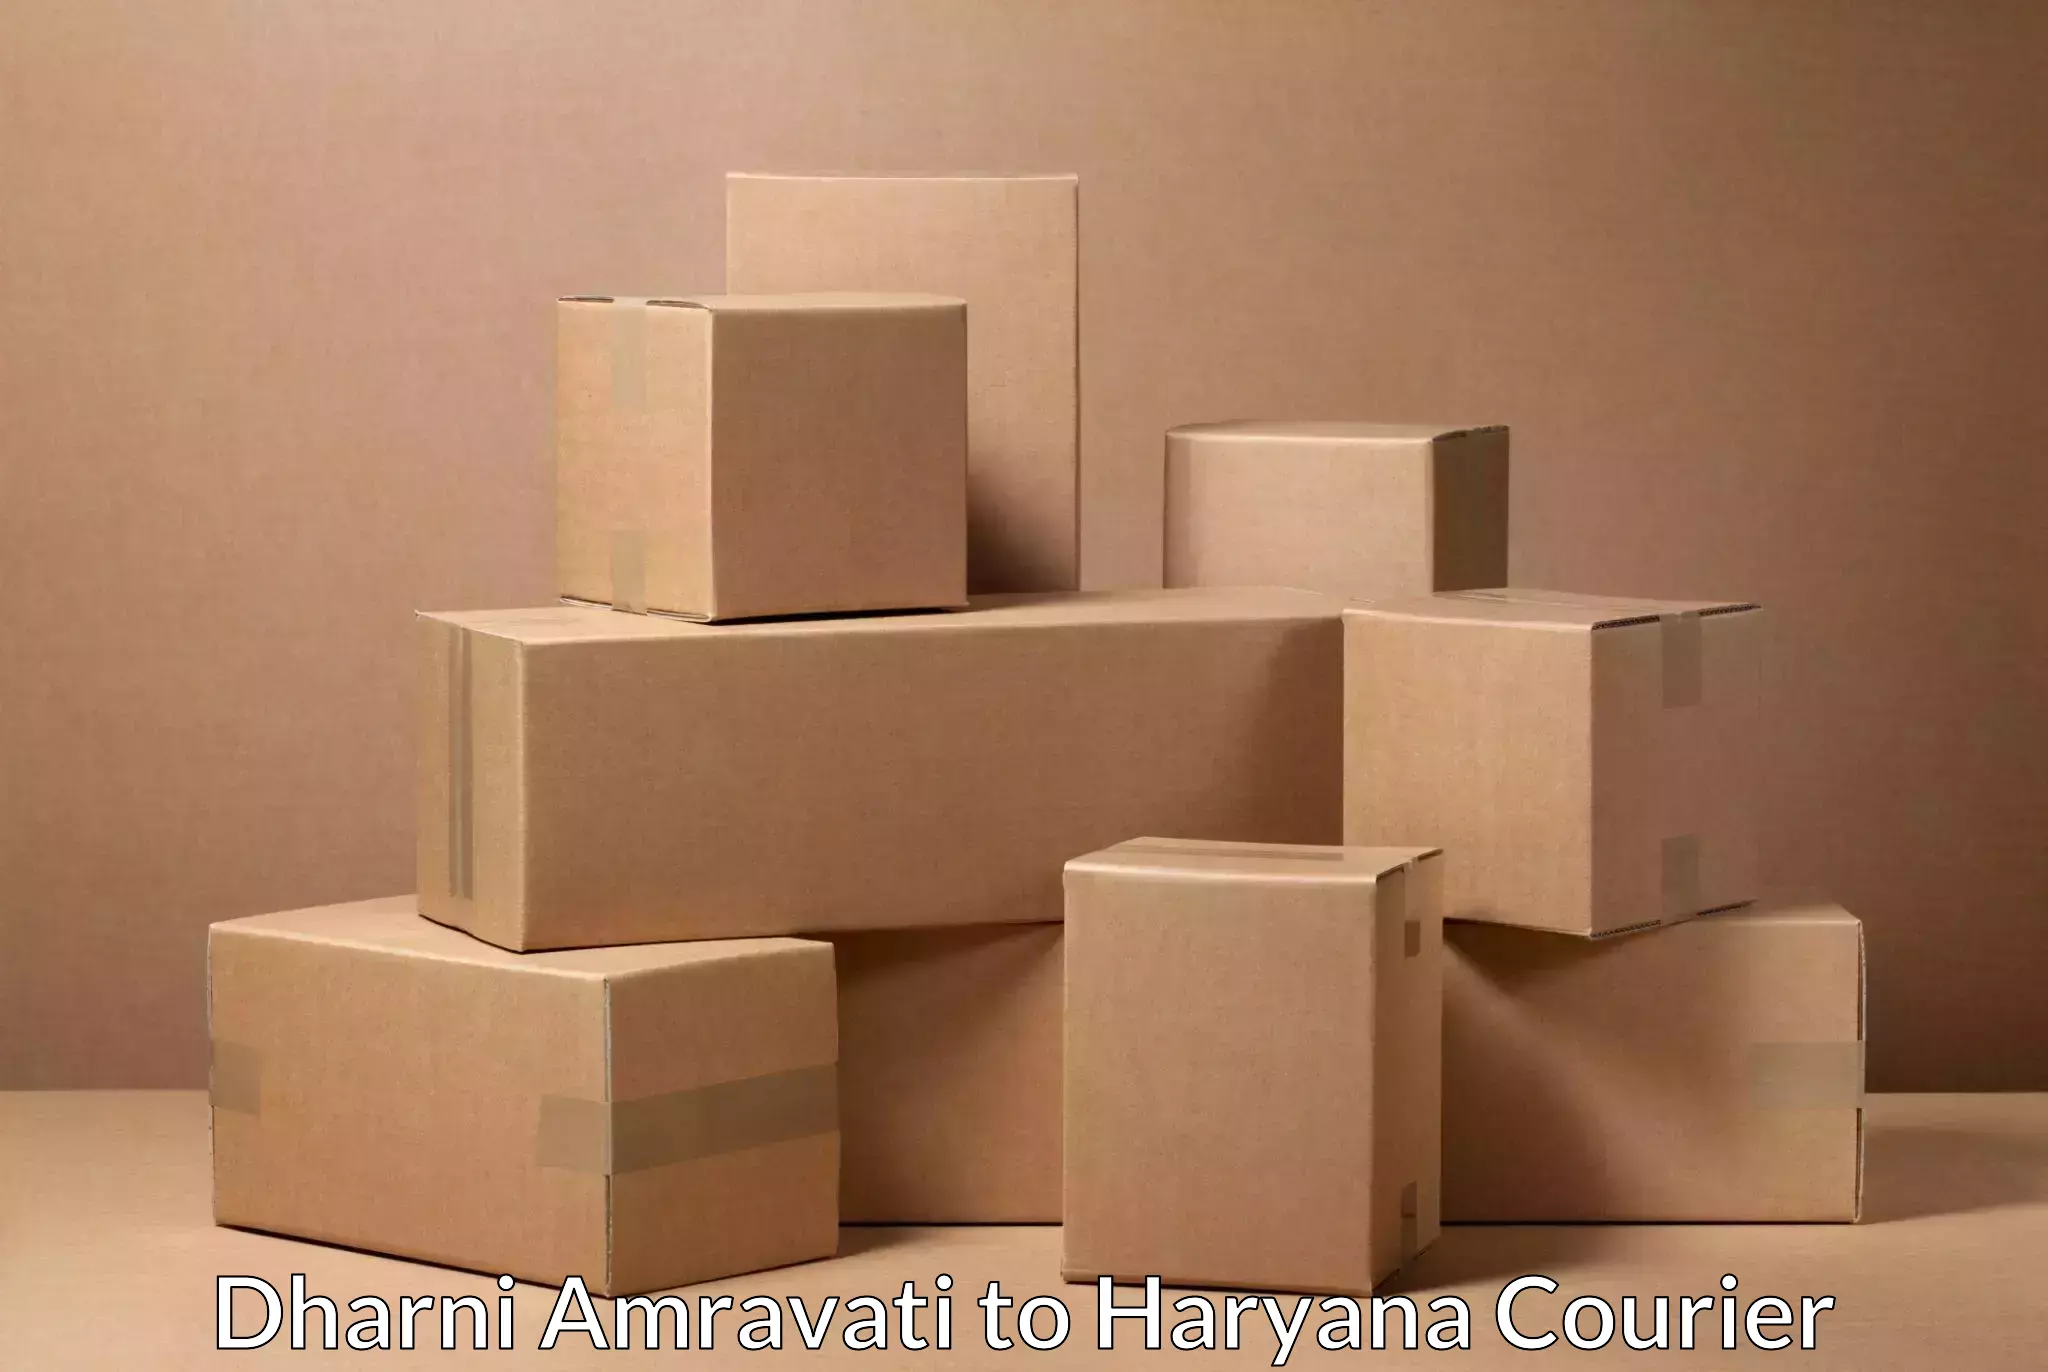 Multi-national courier services Dharni Amravati to Chaudhary Charan Singh Haryana Agricultural University Hisar